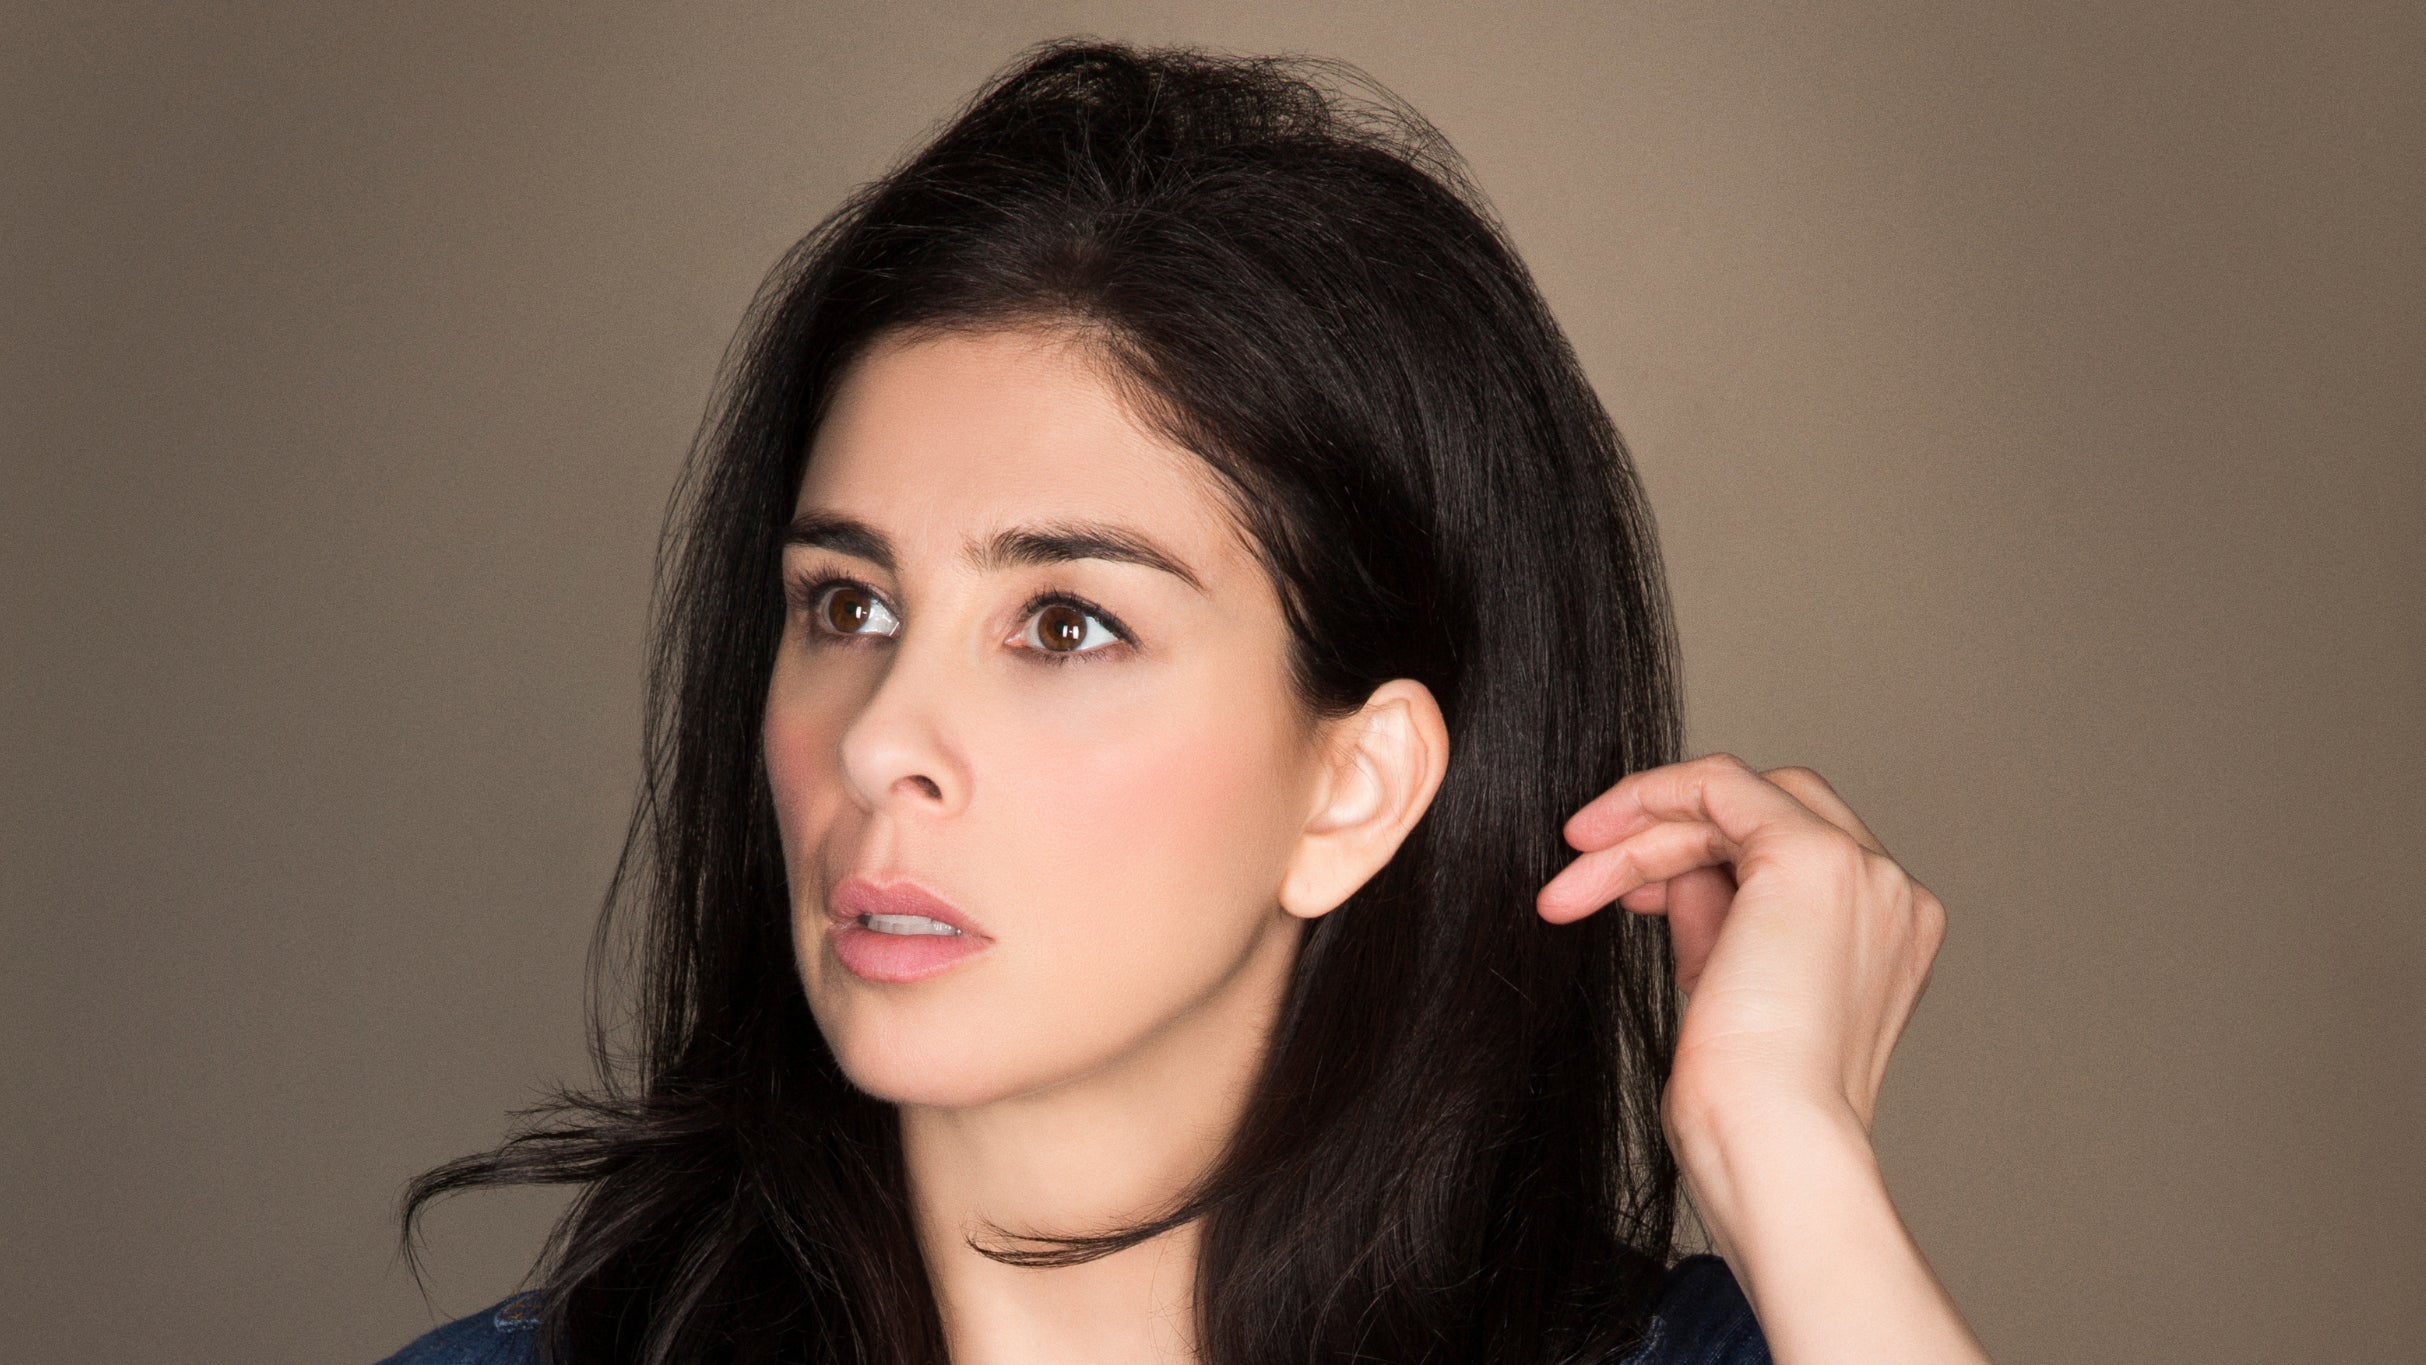 Netflix Is A Joke Presents: Sarah Silverman in Hollywood promo photo for Artist presale offer code